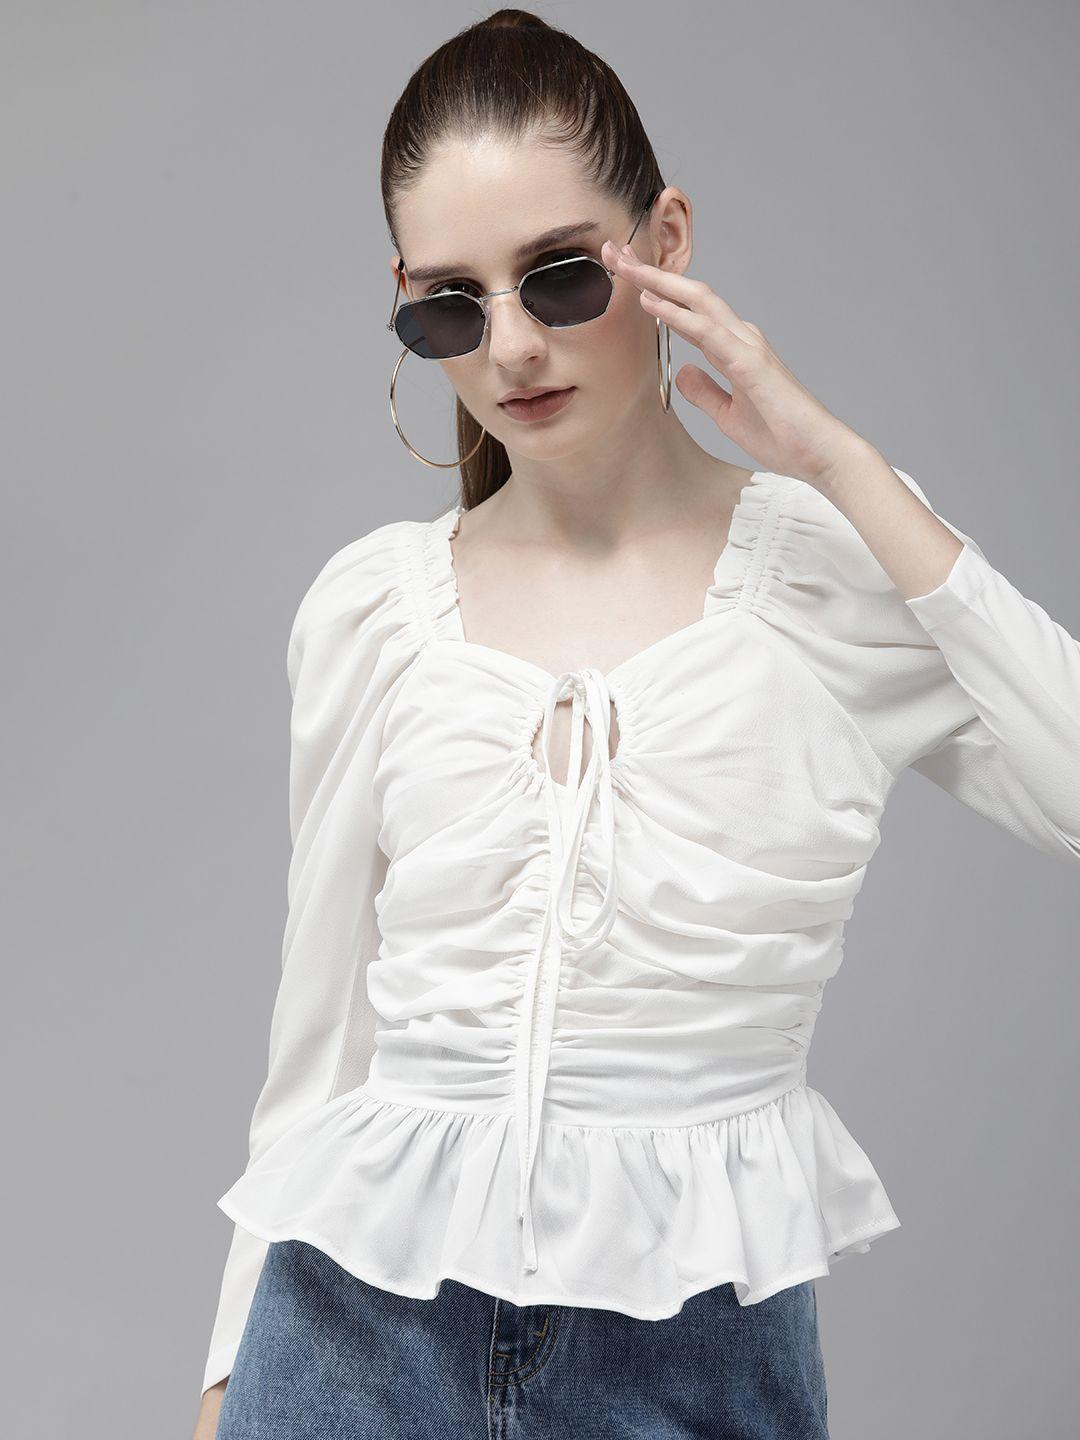 the roadster life co. keyhole neck smoked detail ruched peplum top